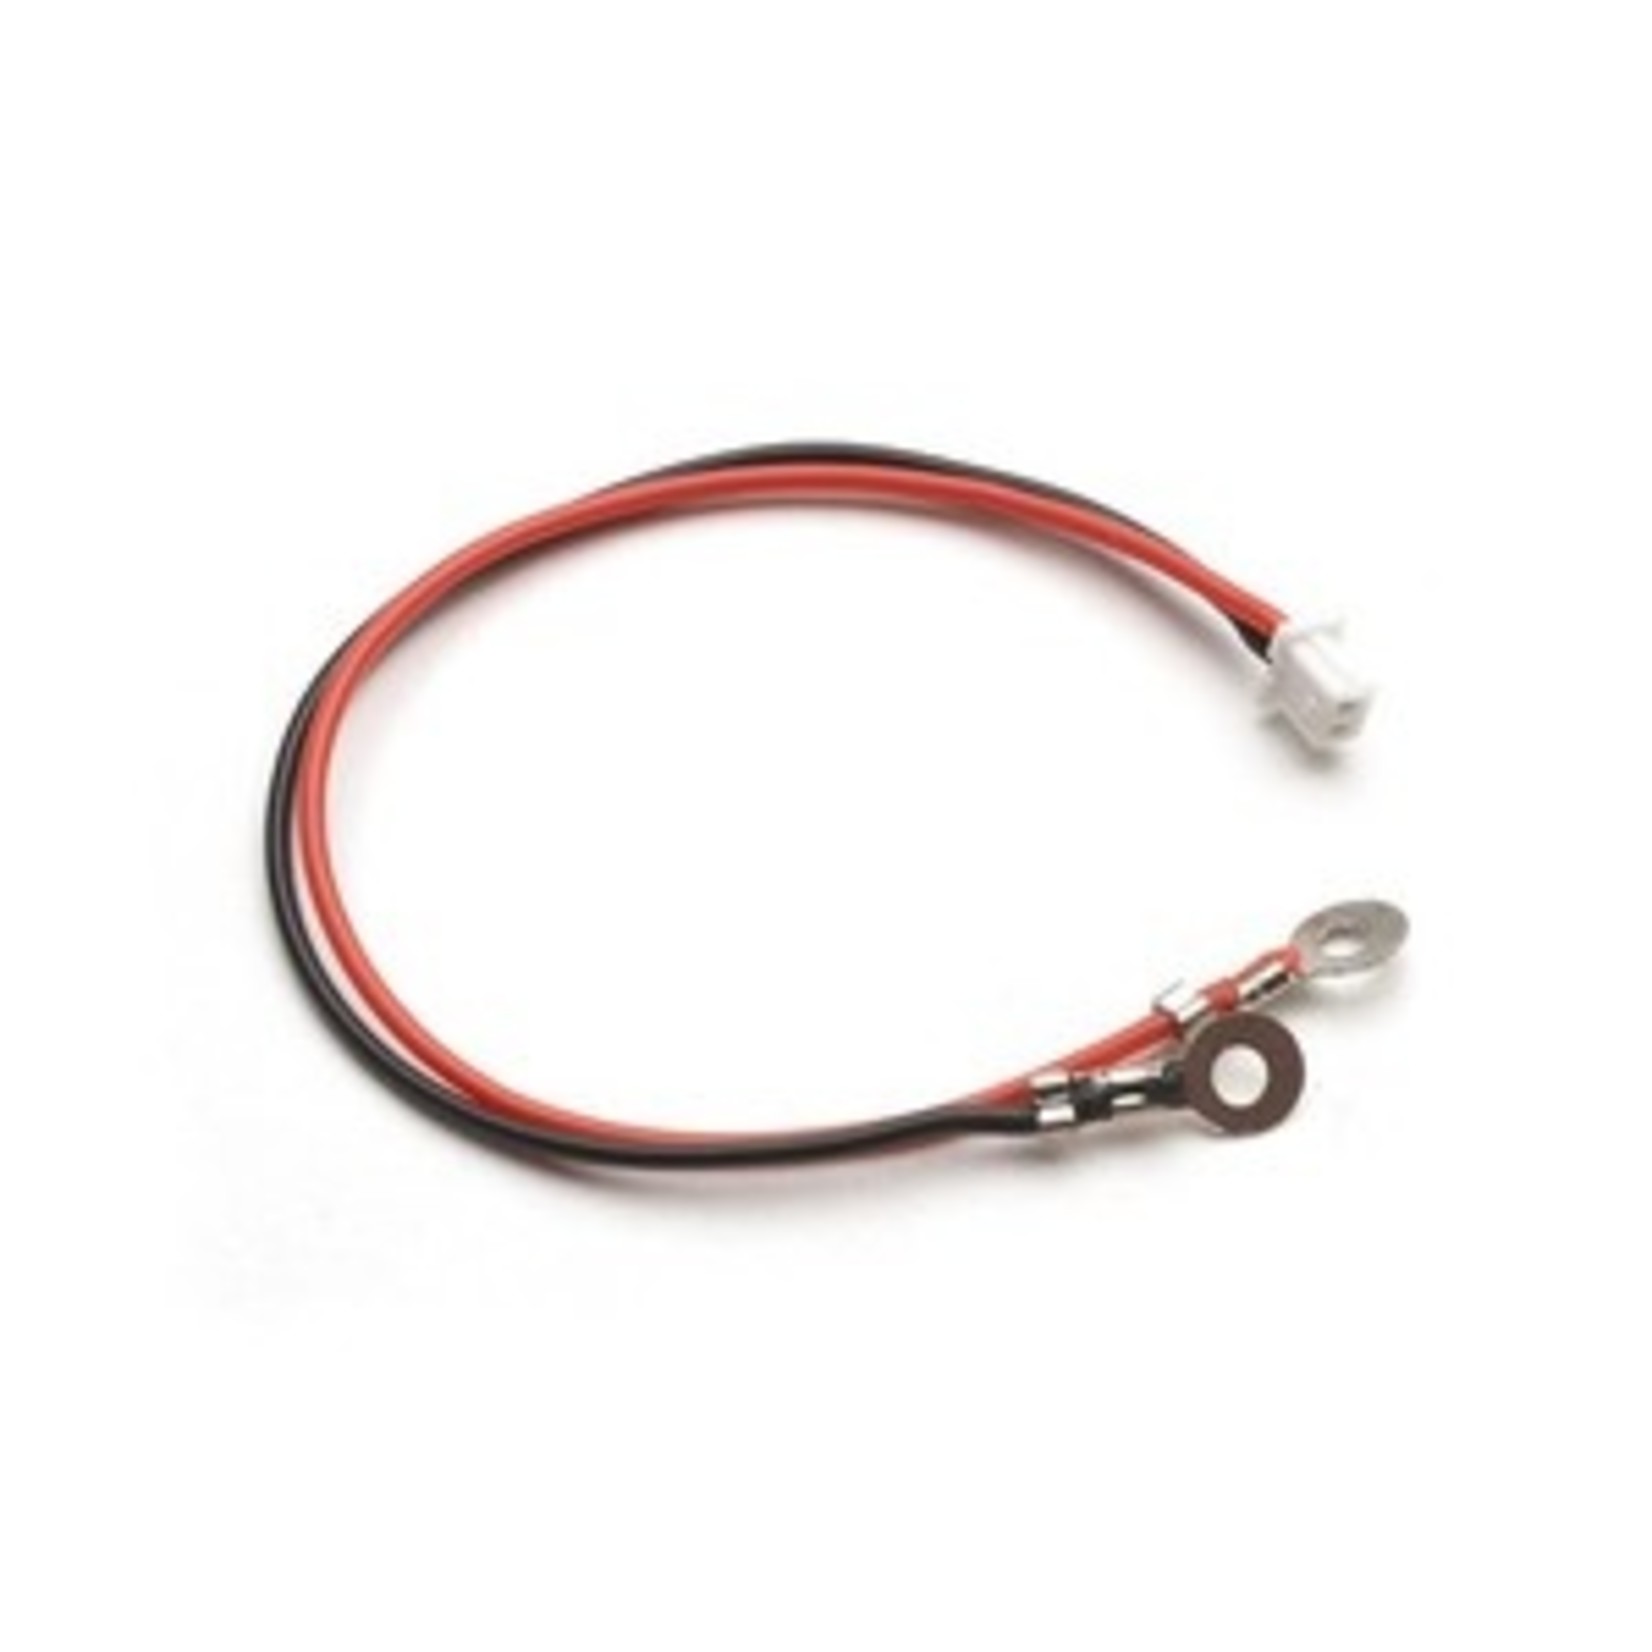 EASYLAP KYOET009-S EasyLap Connect Cable, for Mini-Z Sports